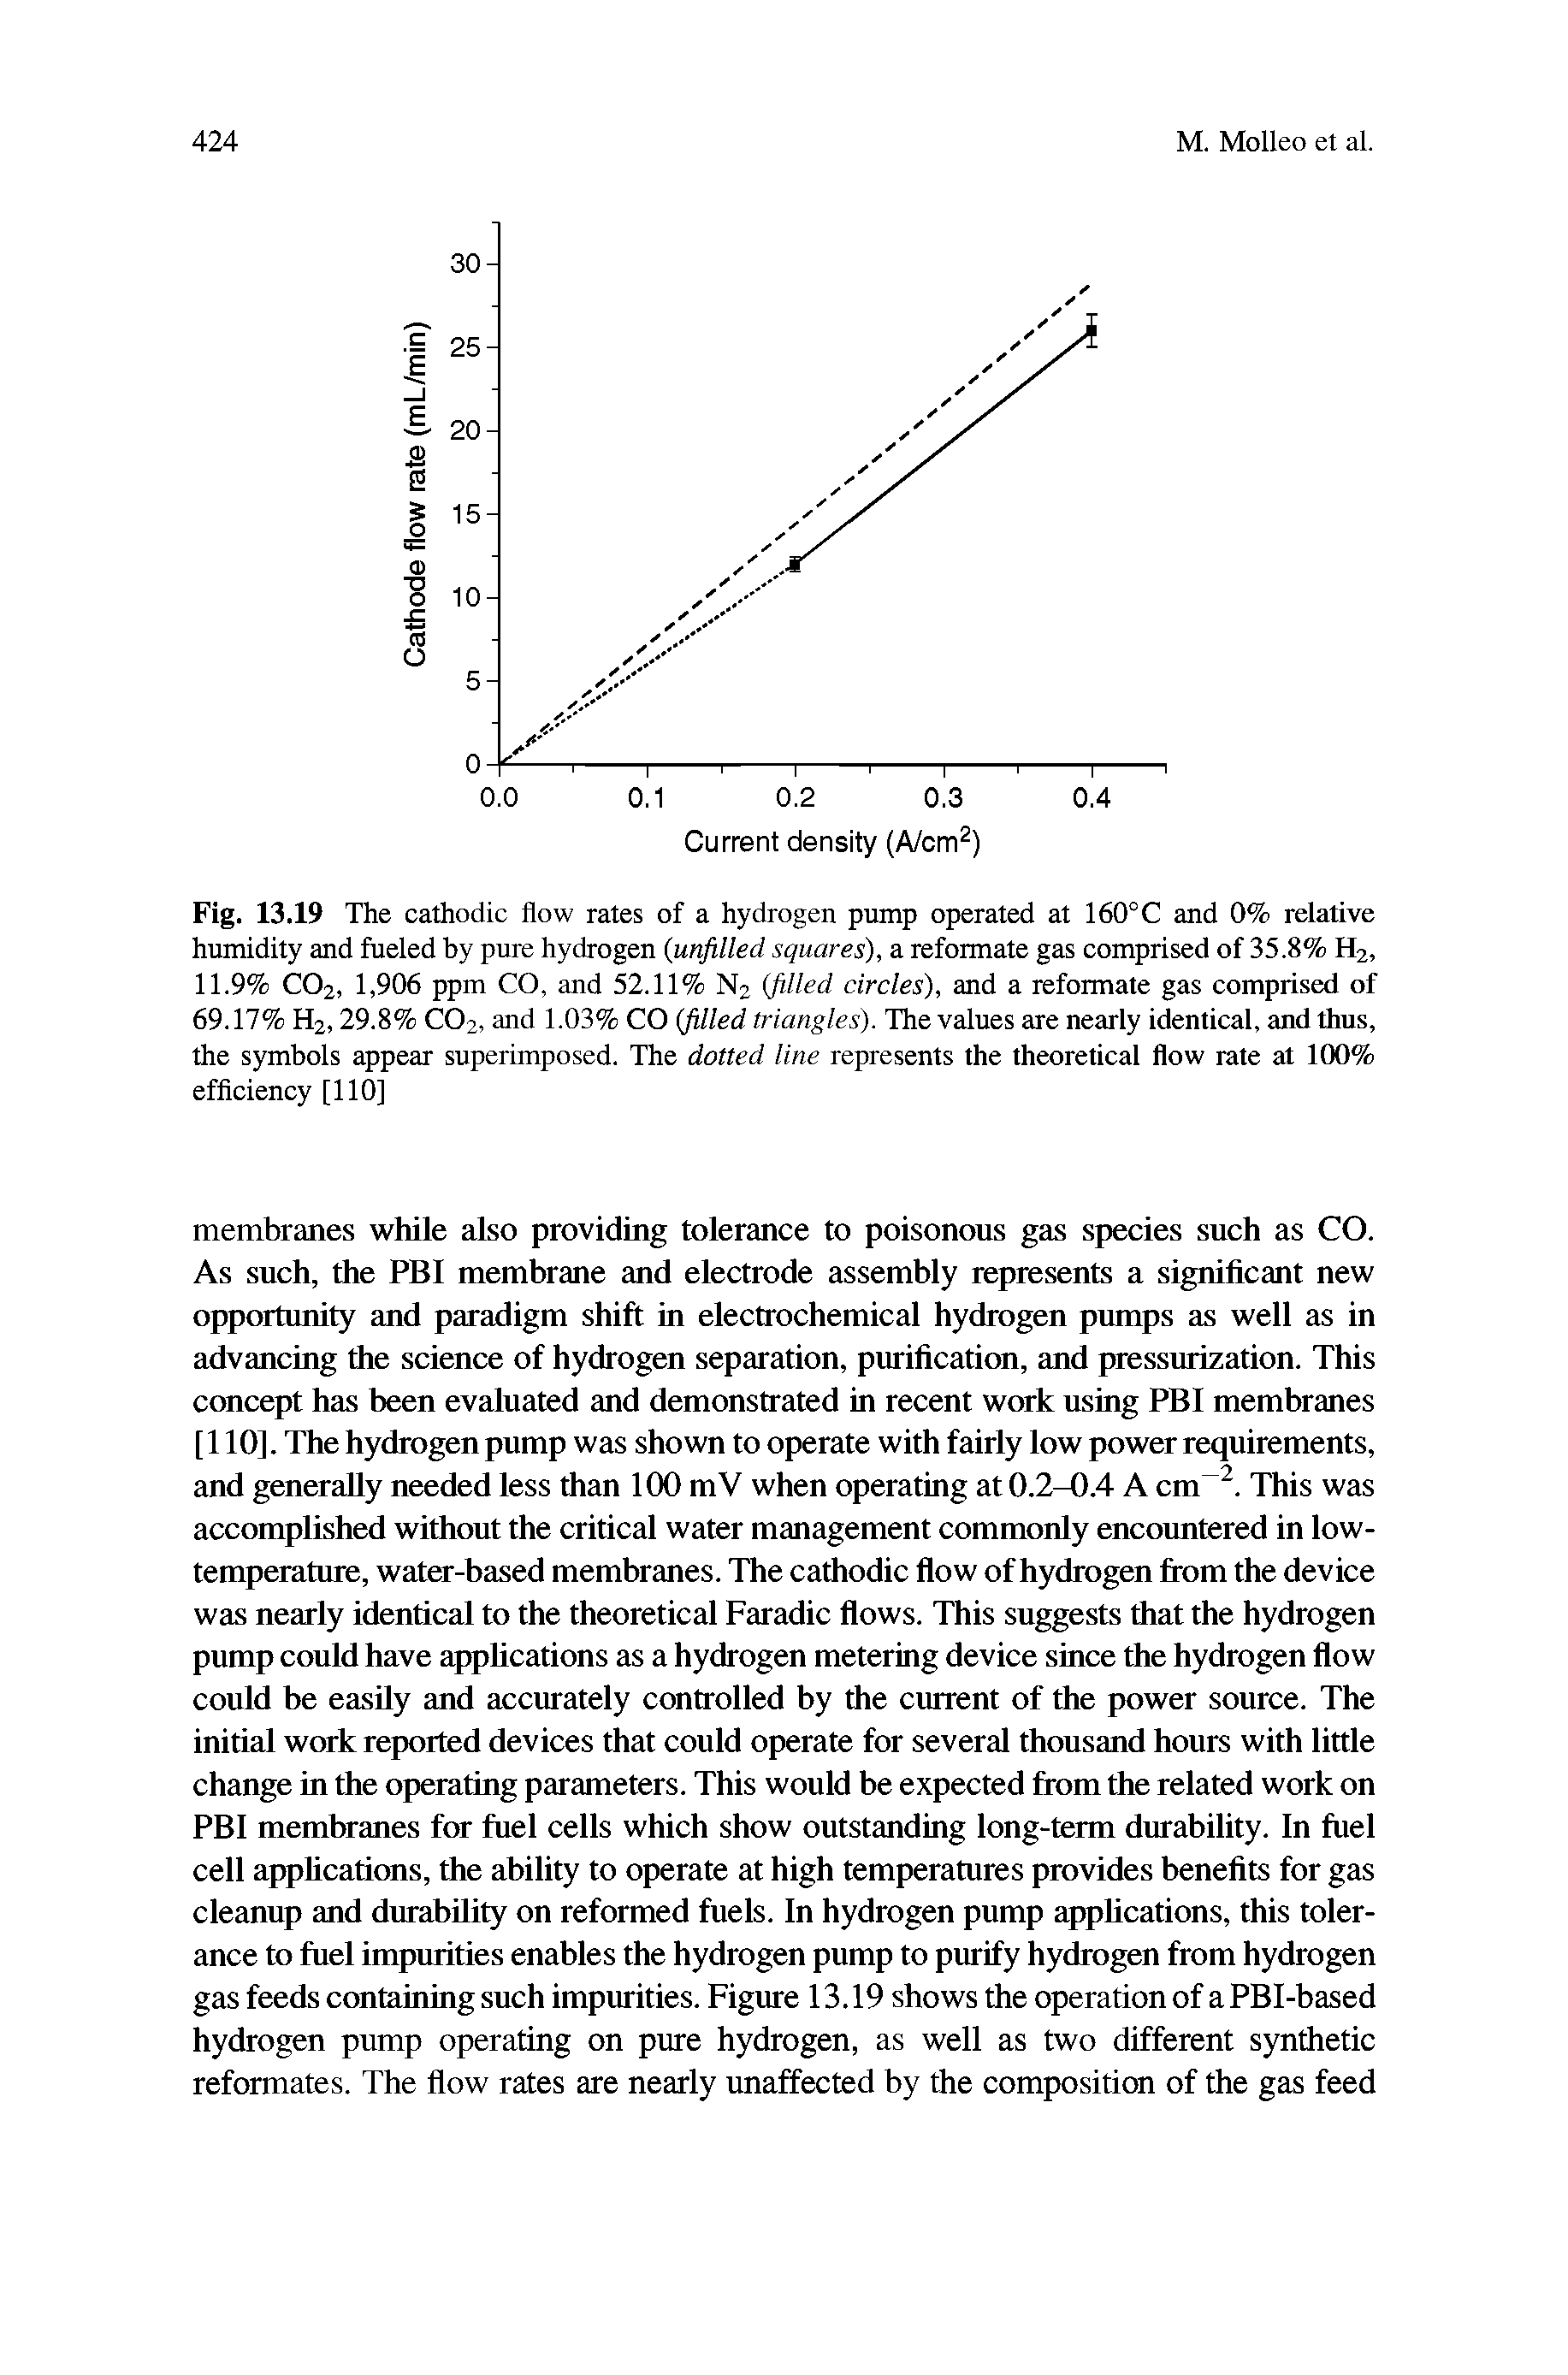 Fig. 13.19 The cathodic flow rates of a hydrogen pump operated at 160°C and 0% relative humidity and fueled by pure hydrogen unfilled squares), a reformate gas comprised of 35.8% H2, 11.9% CO2, 1,906 ppm CO, and 52.11% N2 (filled circles), and a reformate gas comprised of 69.17% H2,29.8% CO2, and 1.03% CO (filled triangles). The values are nearly identical, and thus, the symbols appear superimposed. The dotted line represents the theoretical flow rate at 100% efficiency [110]...